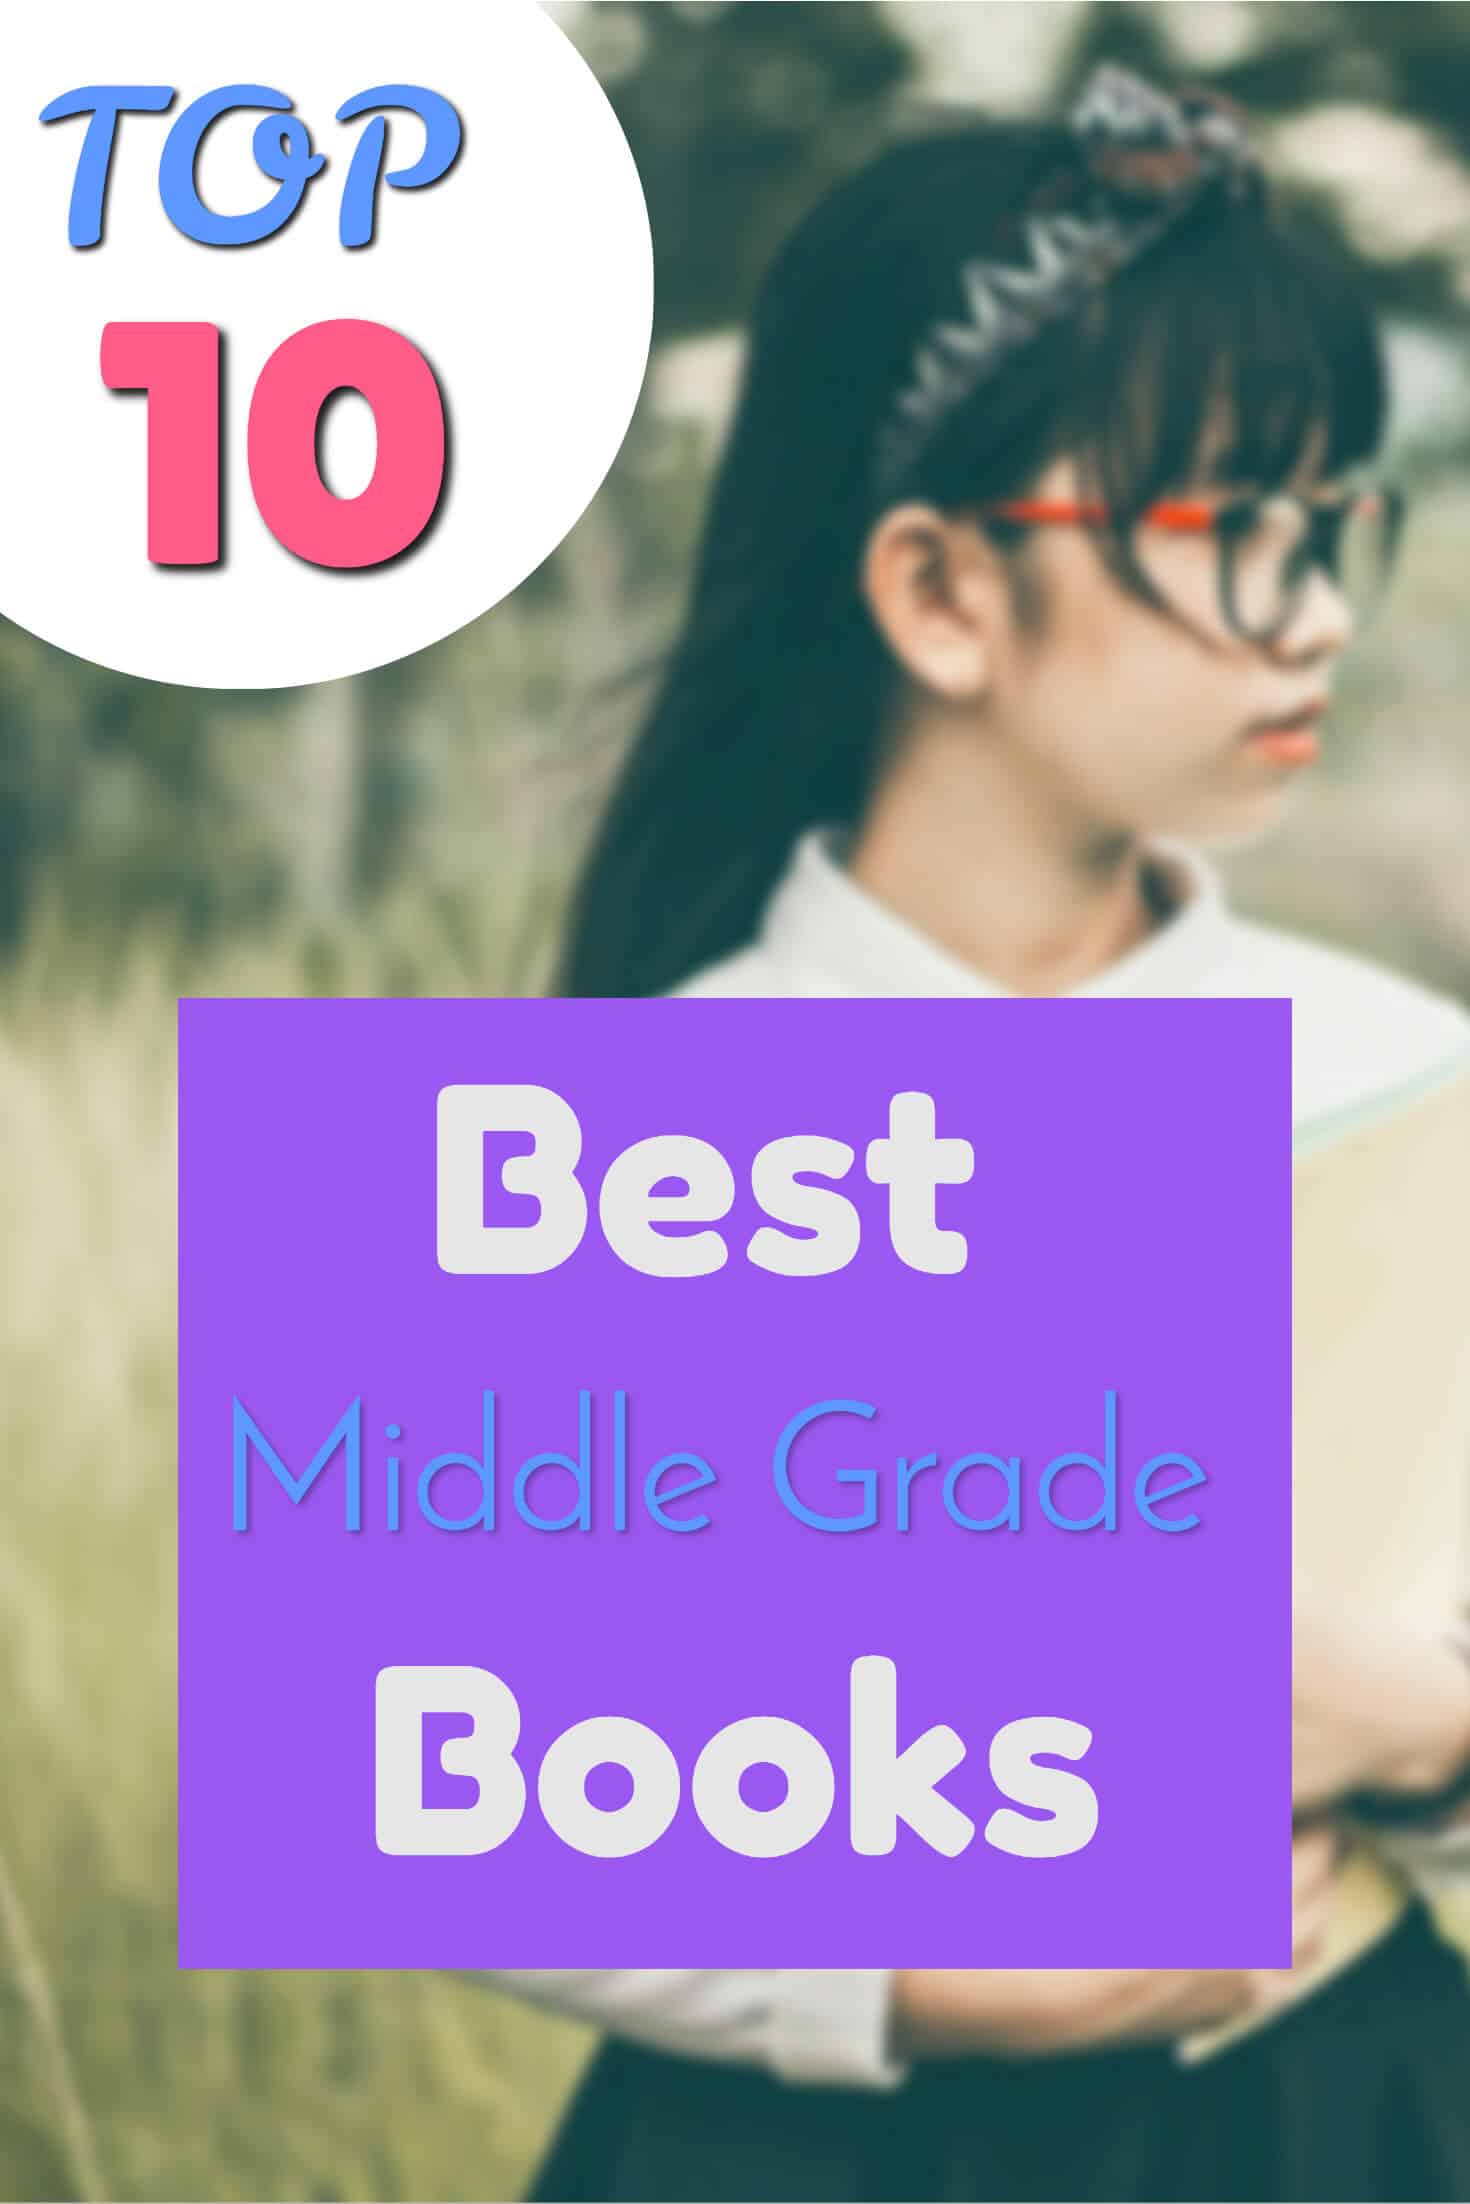 The Top 10 Best MiddleGrade Books That Teach Valuable Lessons